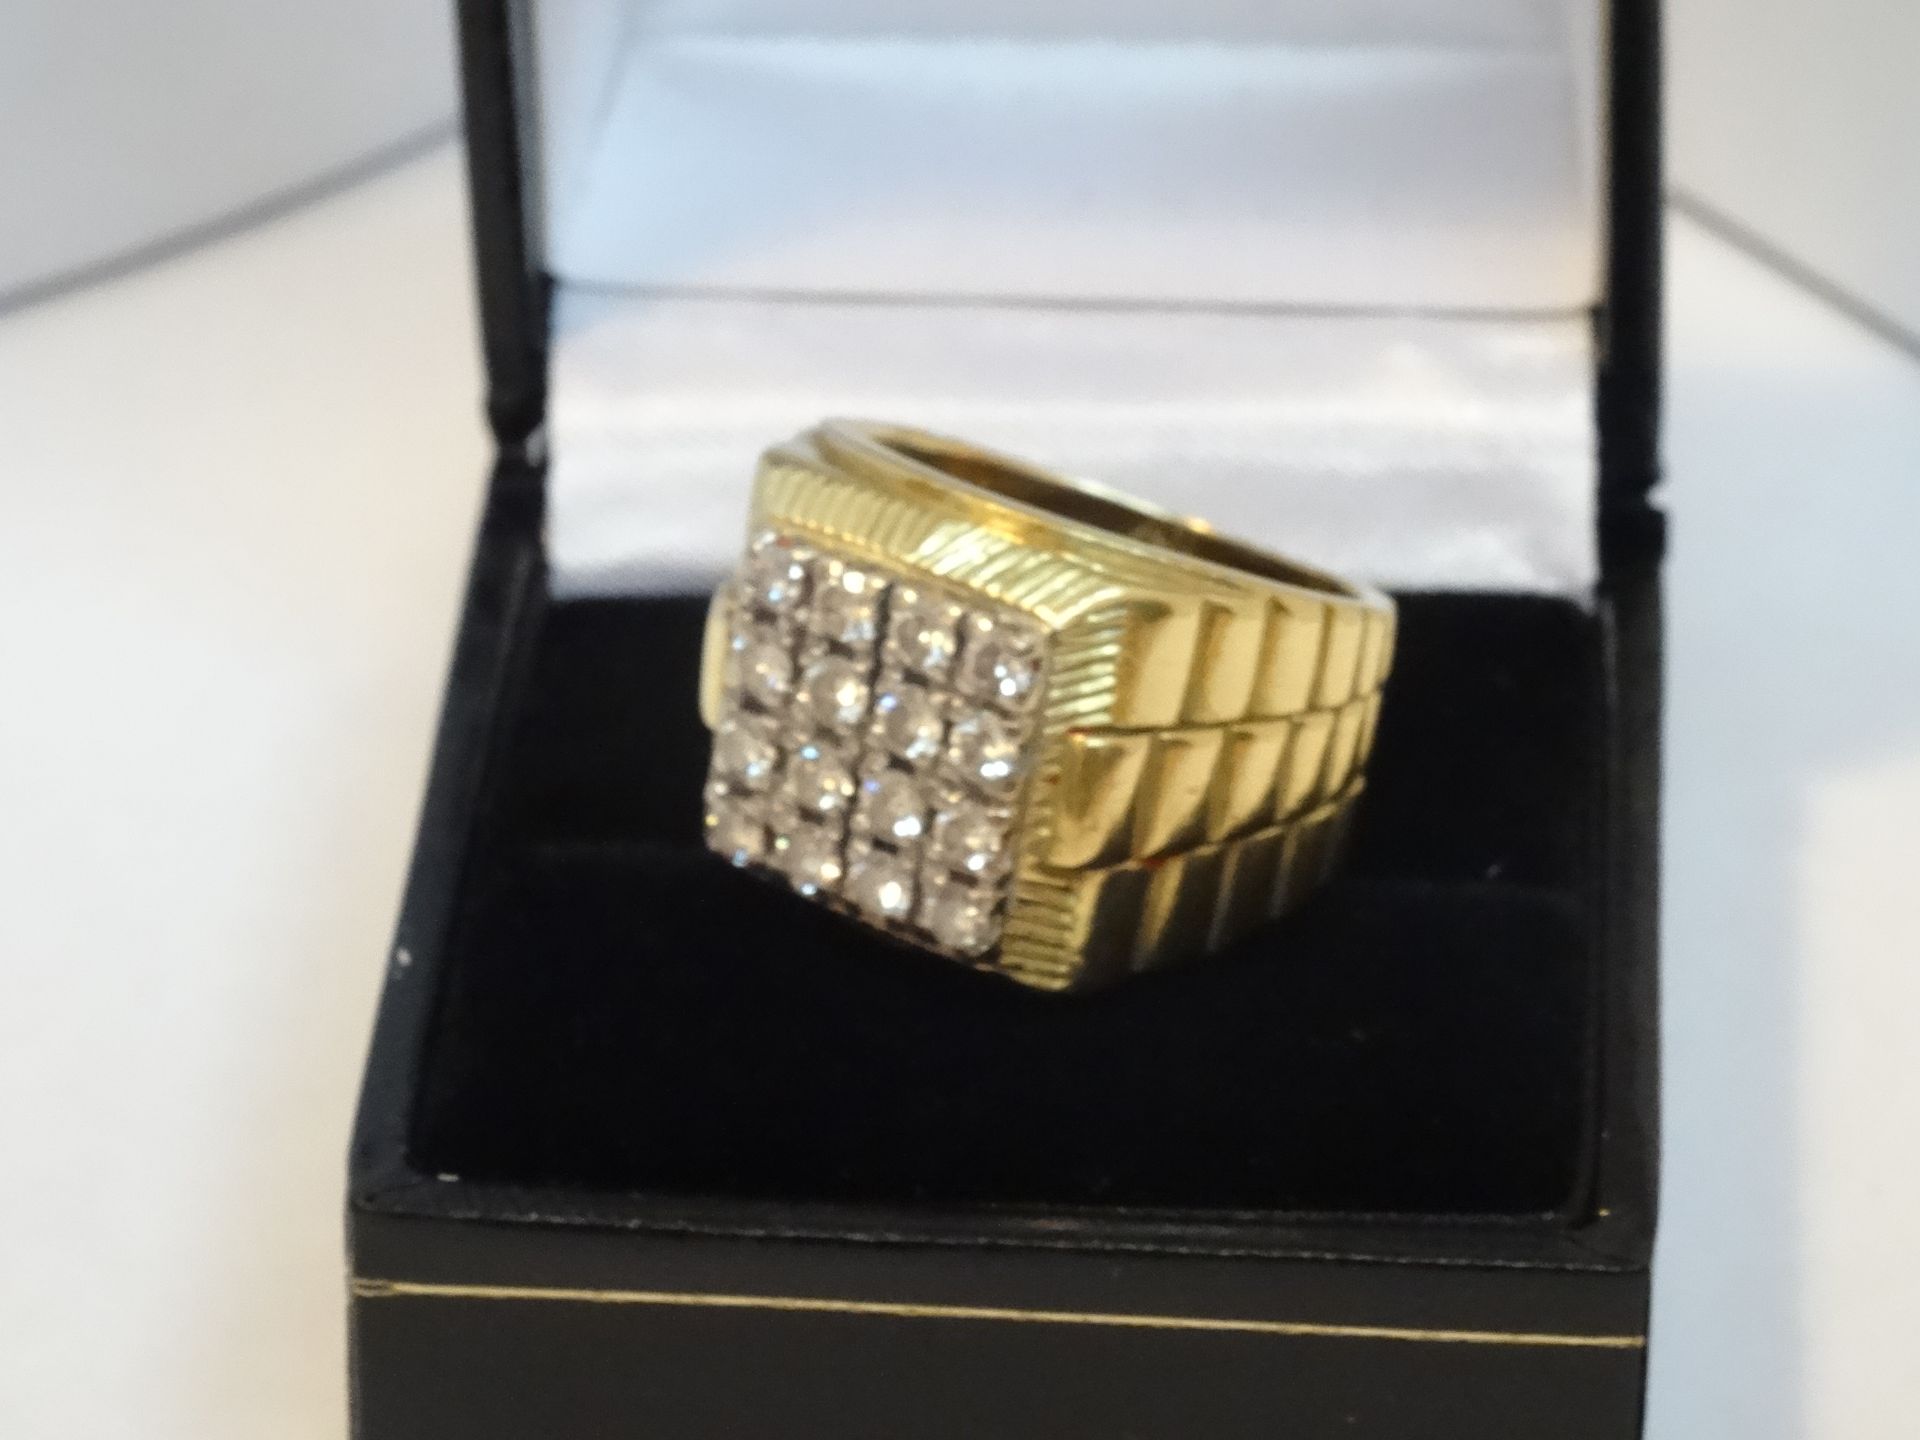 18 Carat Yellow & White Gold Gents Rolex Style Ring Containing 0.8 Carats Of Diamonds. - Image 3 of 6